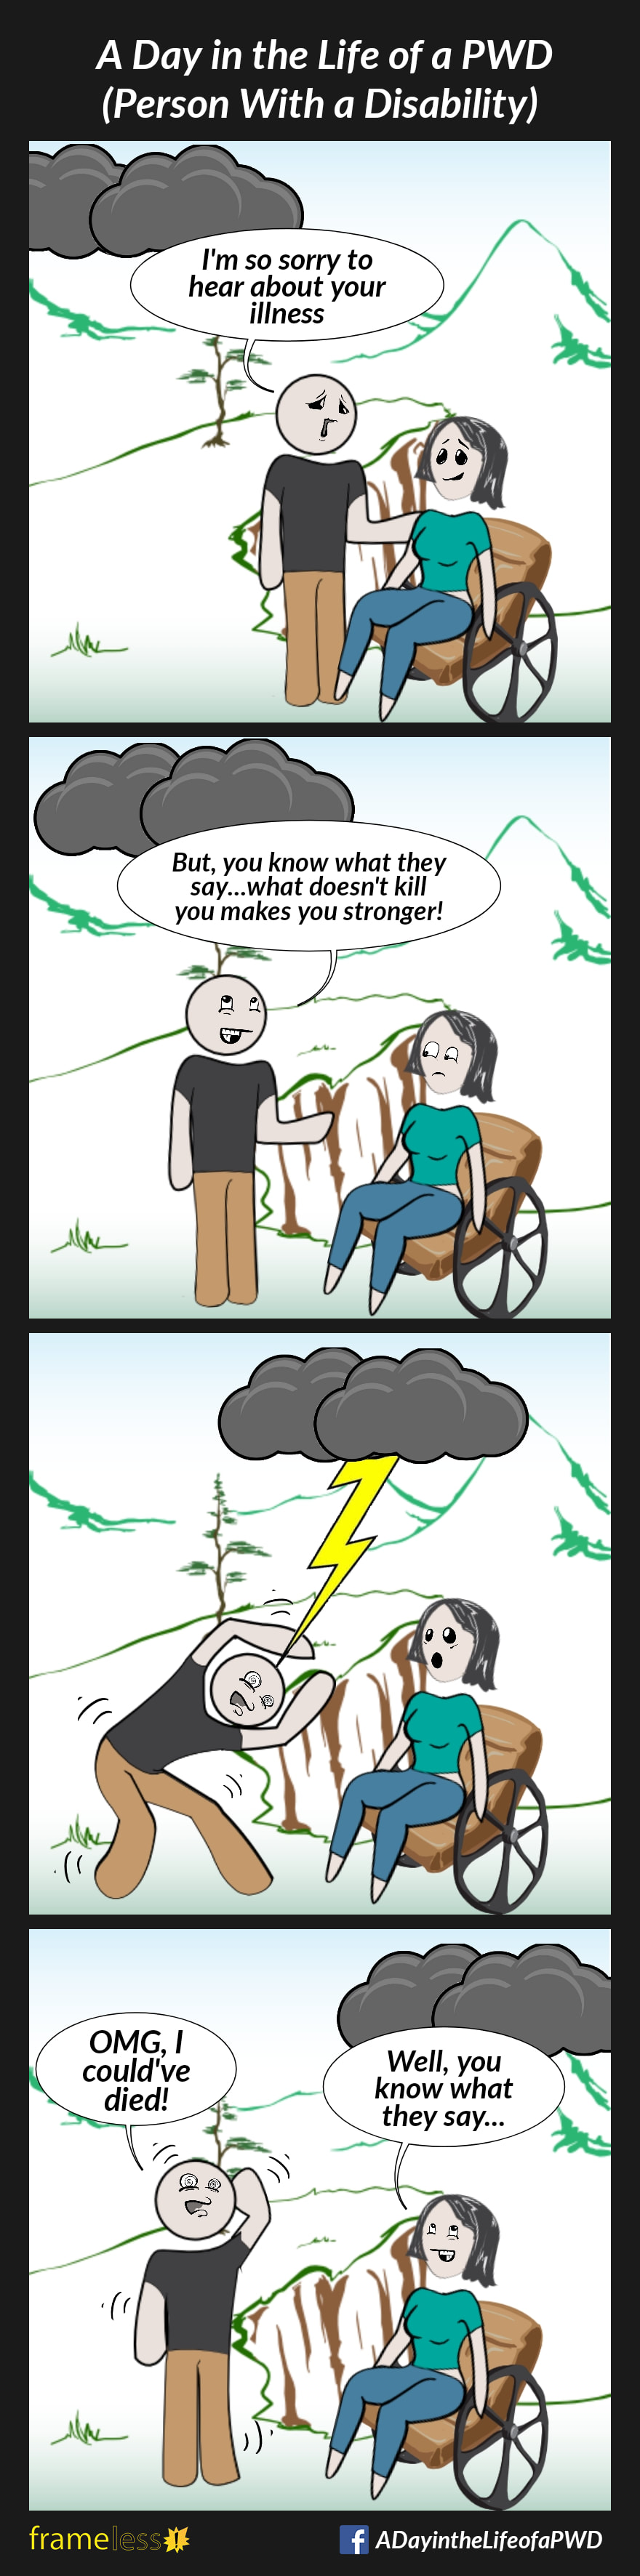 COMIC STRIP 
A Day in the Life of a PWD (Person With a Disability) 

Frame 1:
A woman in a wheelchair is approached by an acquaintance. In the sky, dark storm clouds are rolling in.
ACQUAINTANCE (touching the woman's shoulder): I'm so sorry to hear about your illness

Frame 2:
ACQUAINTANCE: But you know what they say...what doesn't kill you makes you stronger!

Frame 3:
A lightening bolt streaks from the storm clouds and strikes the acquaintance. 

Frame 4:
ACQUAINTANCE: OMG, I could've died!
WOMAN: Well, you know what they say...